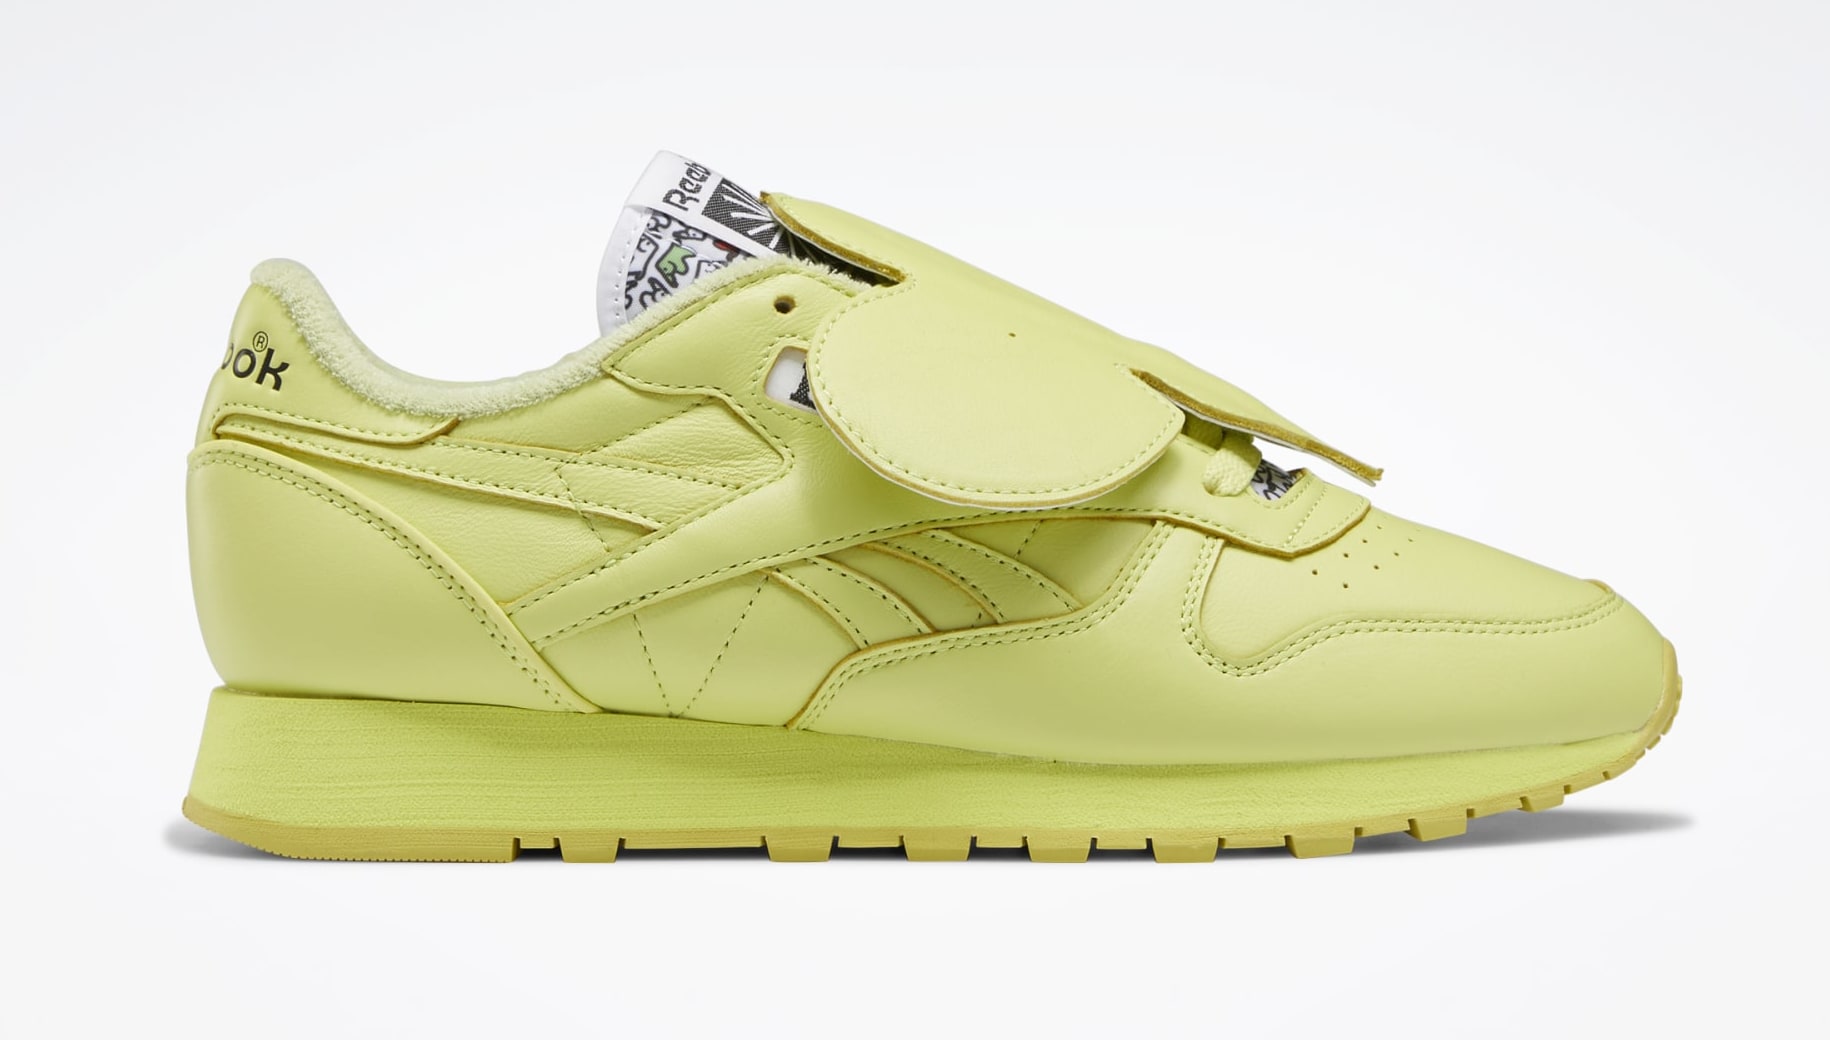 Eames x Reebok Classic Leather 'Yellow Elephant' GY6386 Lateral